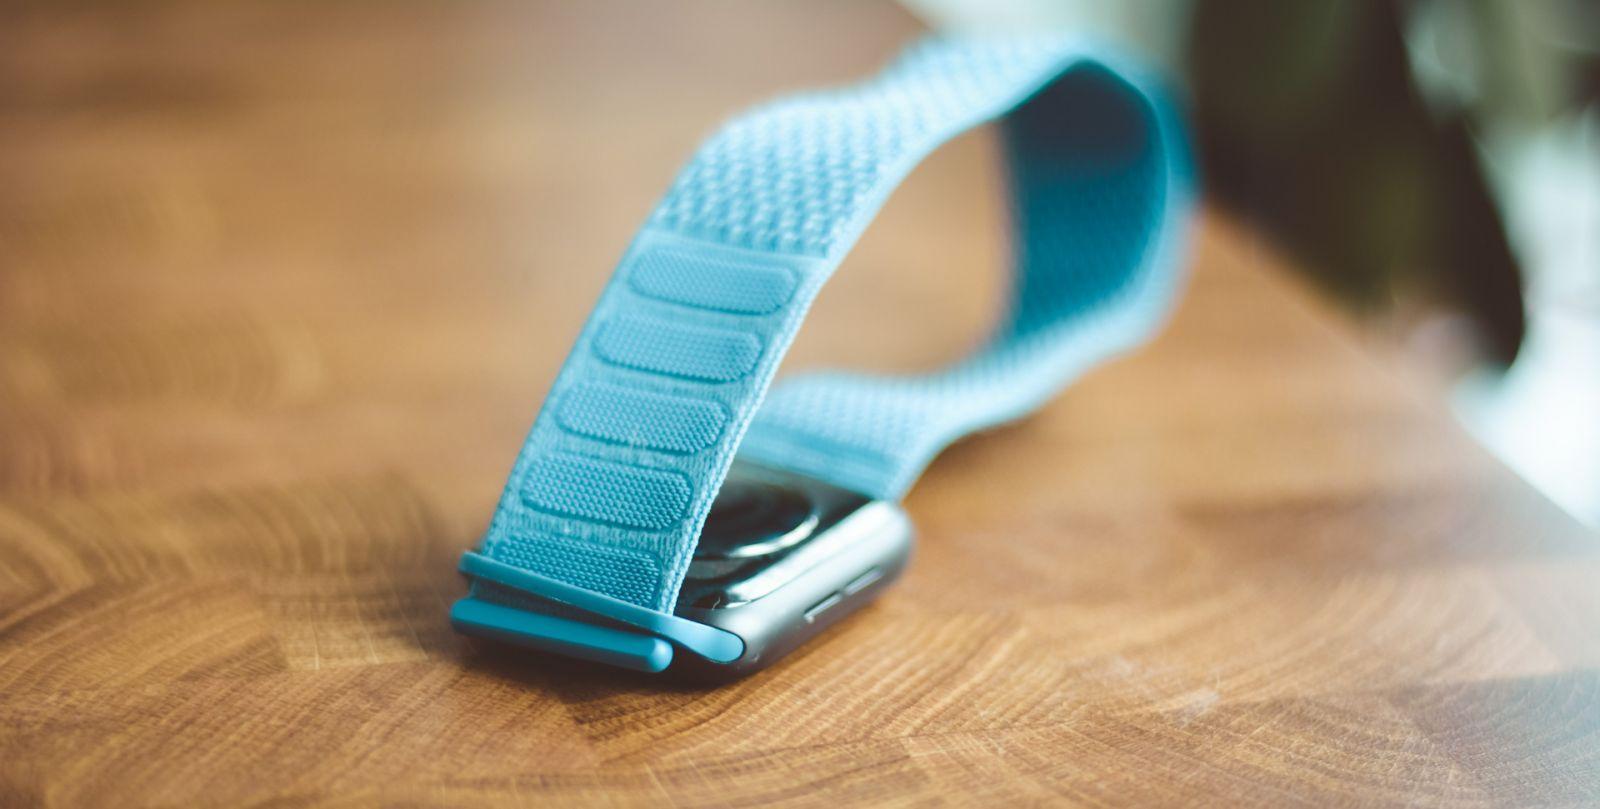 How to choose an iPhone case and Apple Watch strap